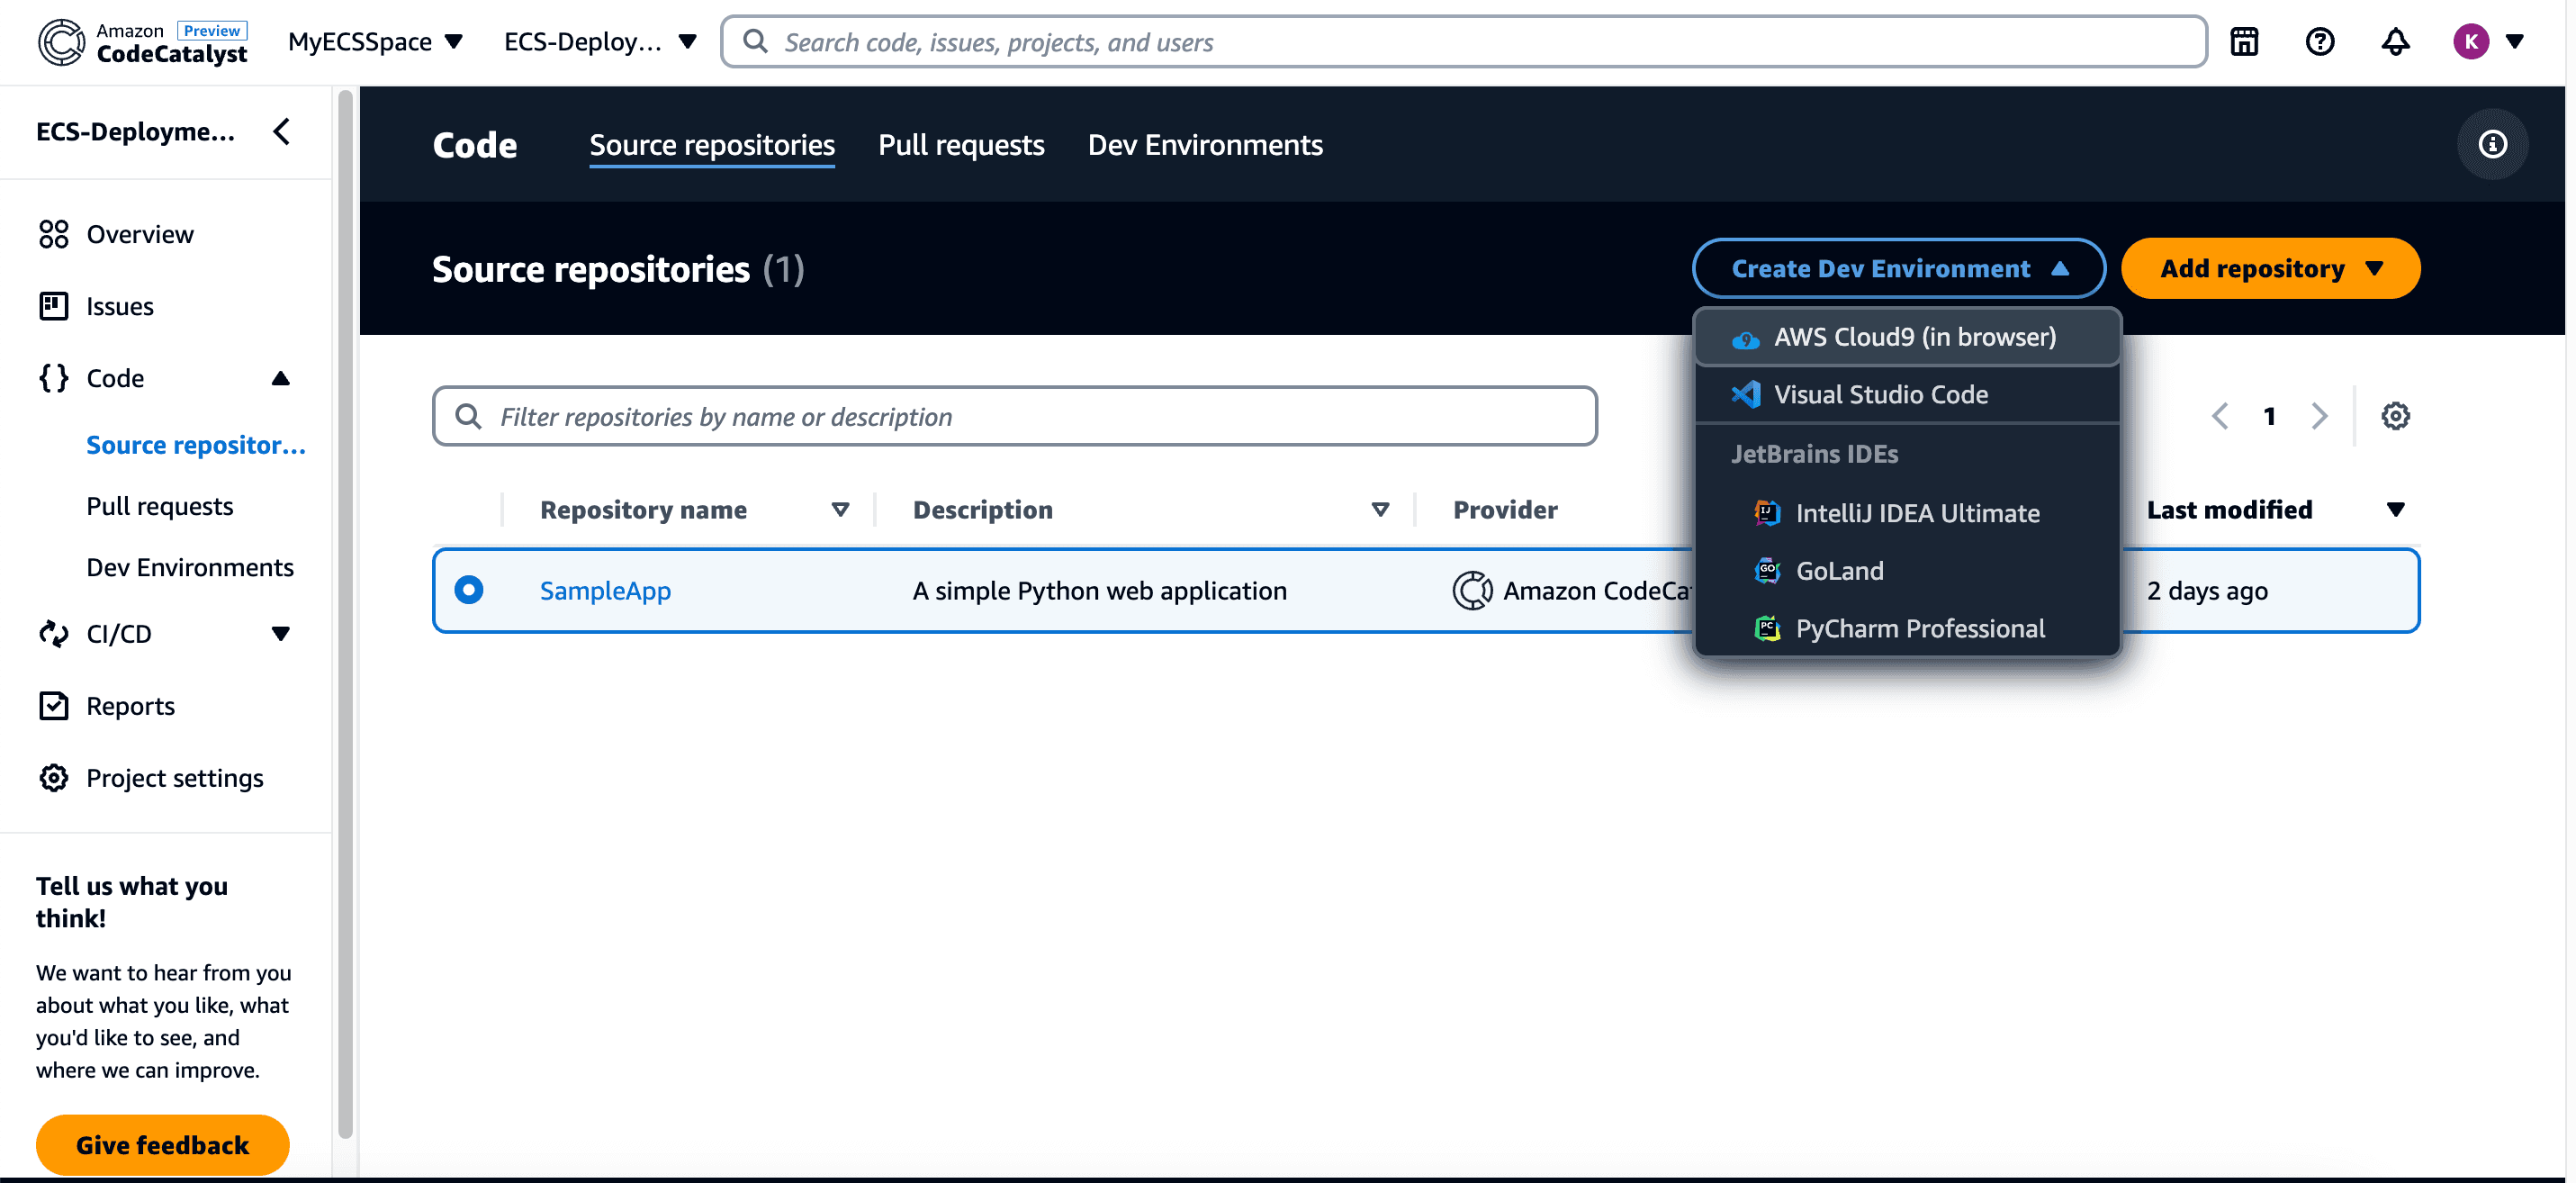 Dropdown showing how to create a CodeCatalyst Dev Environment